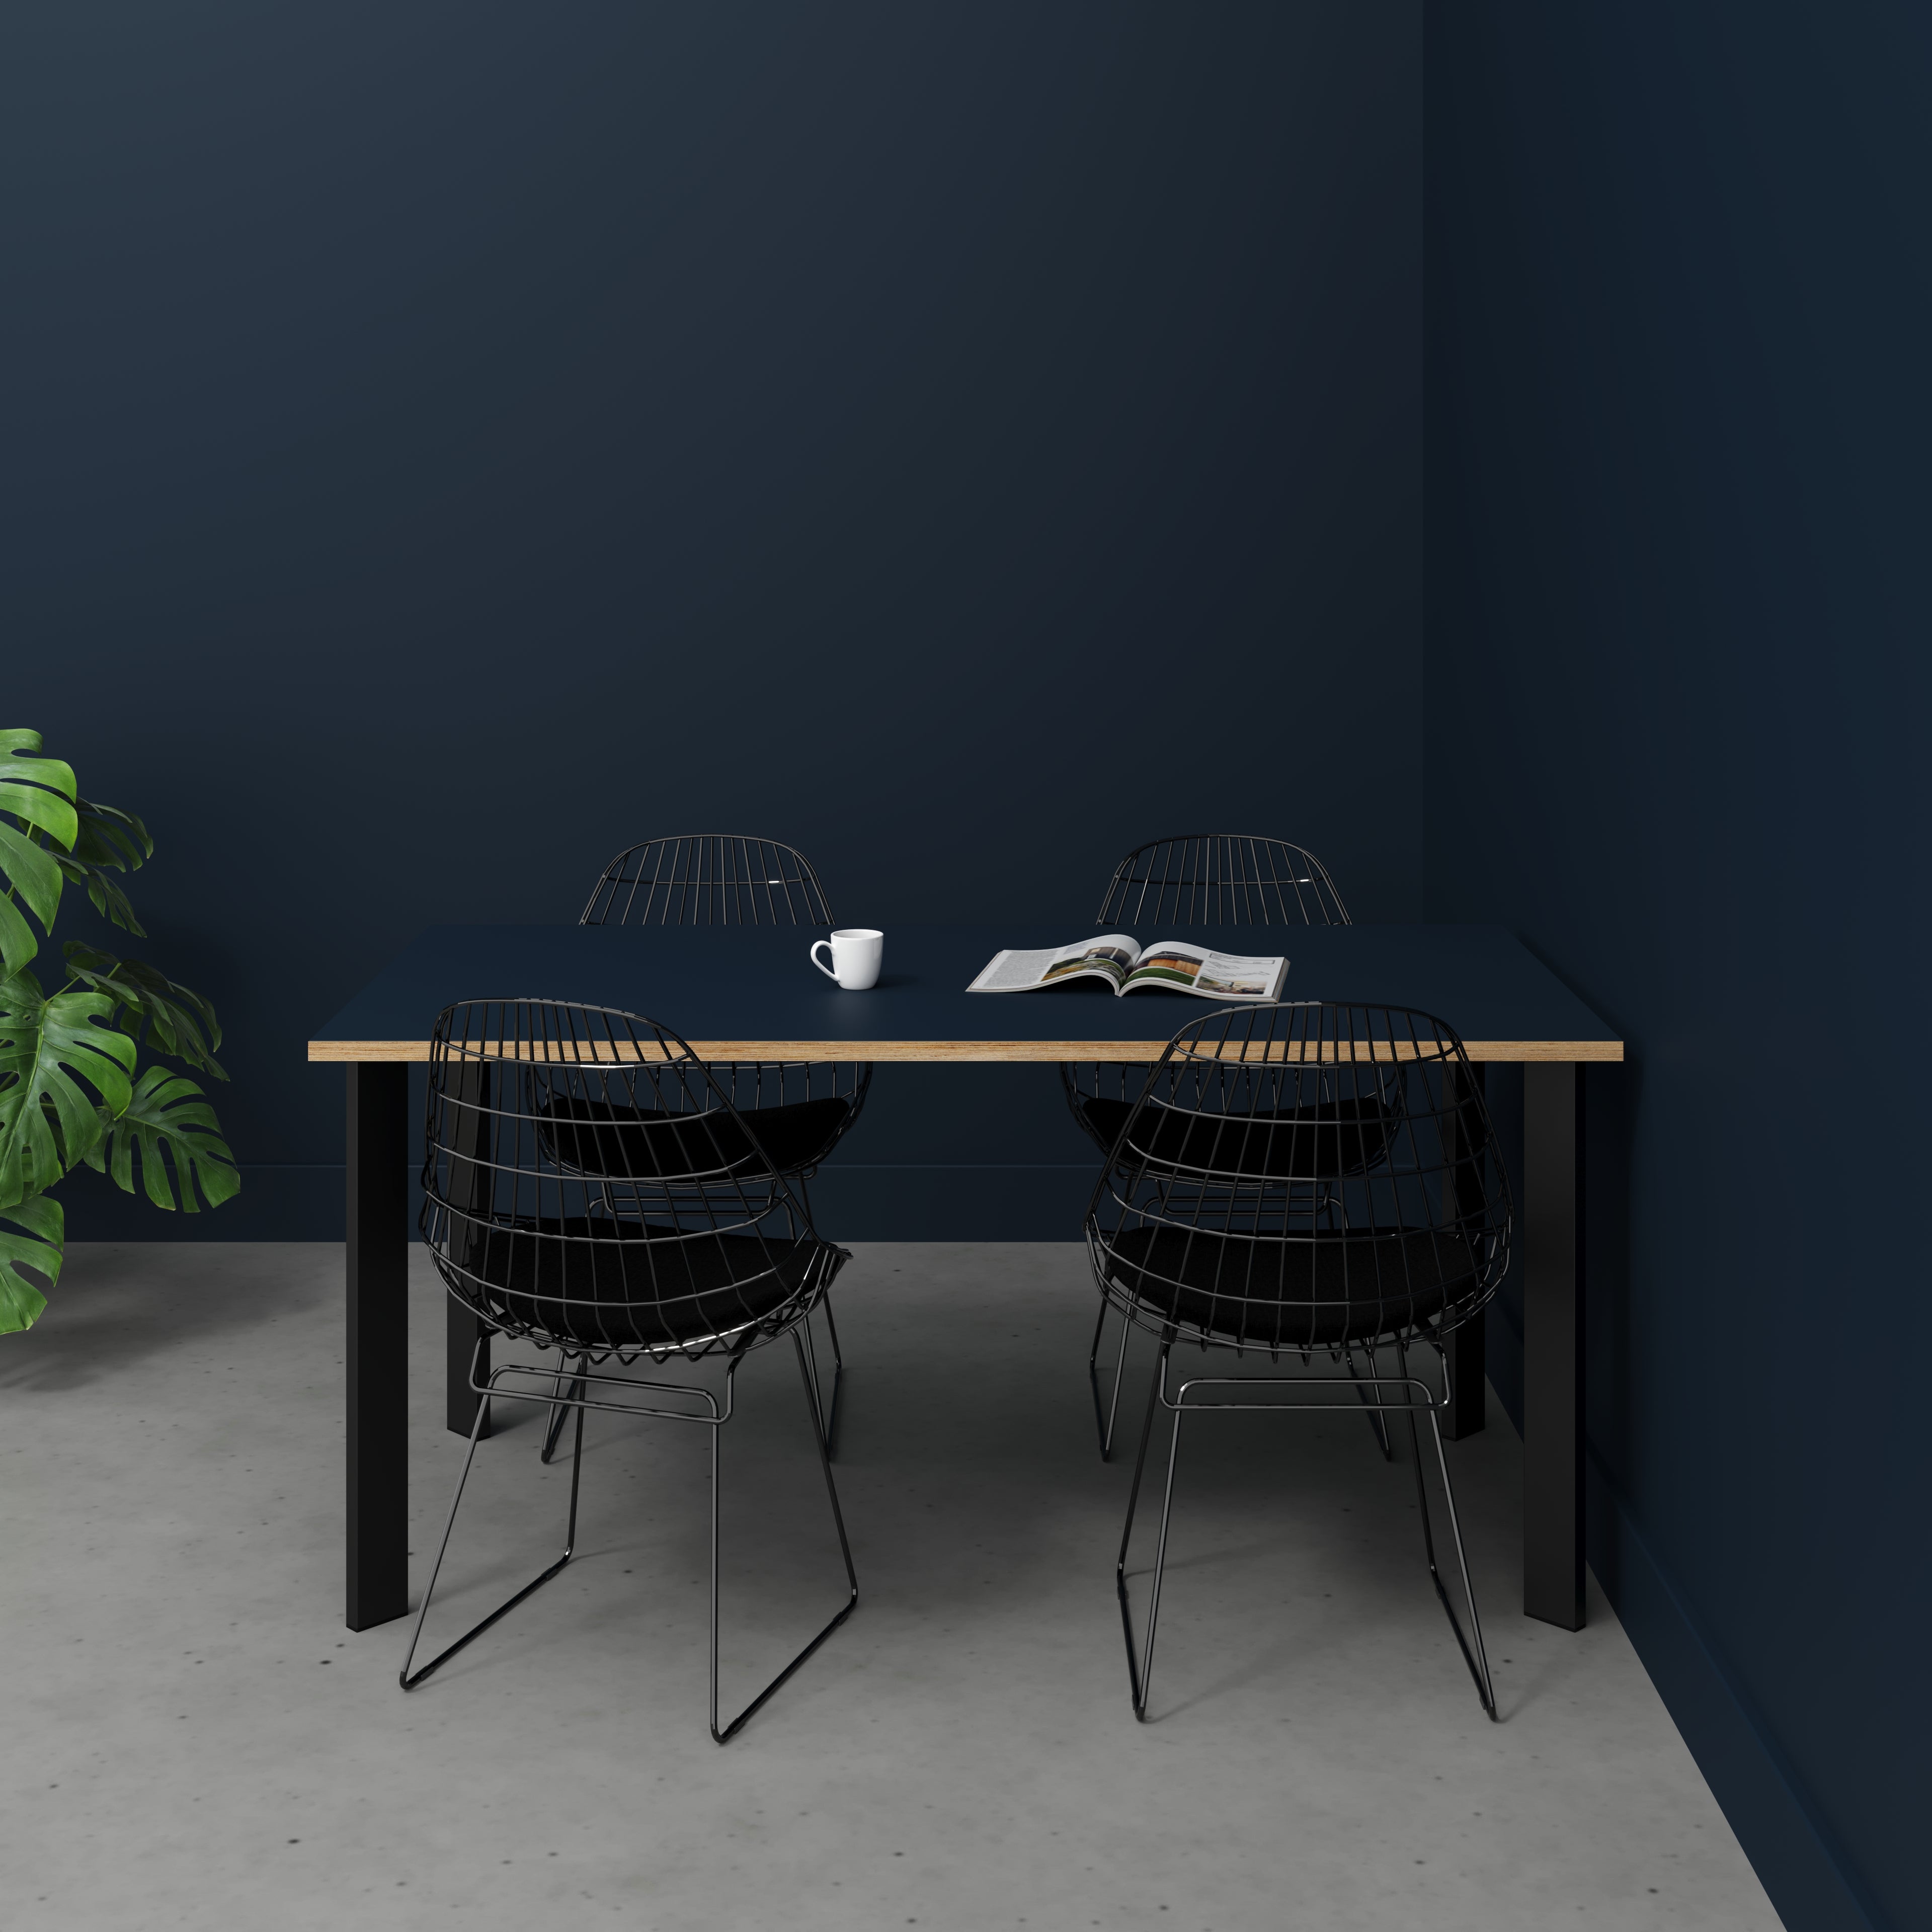 Table with Black Rectangular Single Pin Legs - Formica Night Sea Blue - 1600(w) x 800(d) x 735(h)